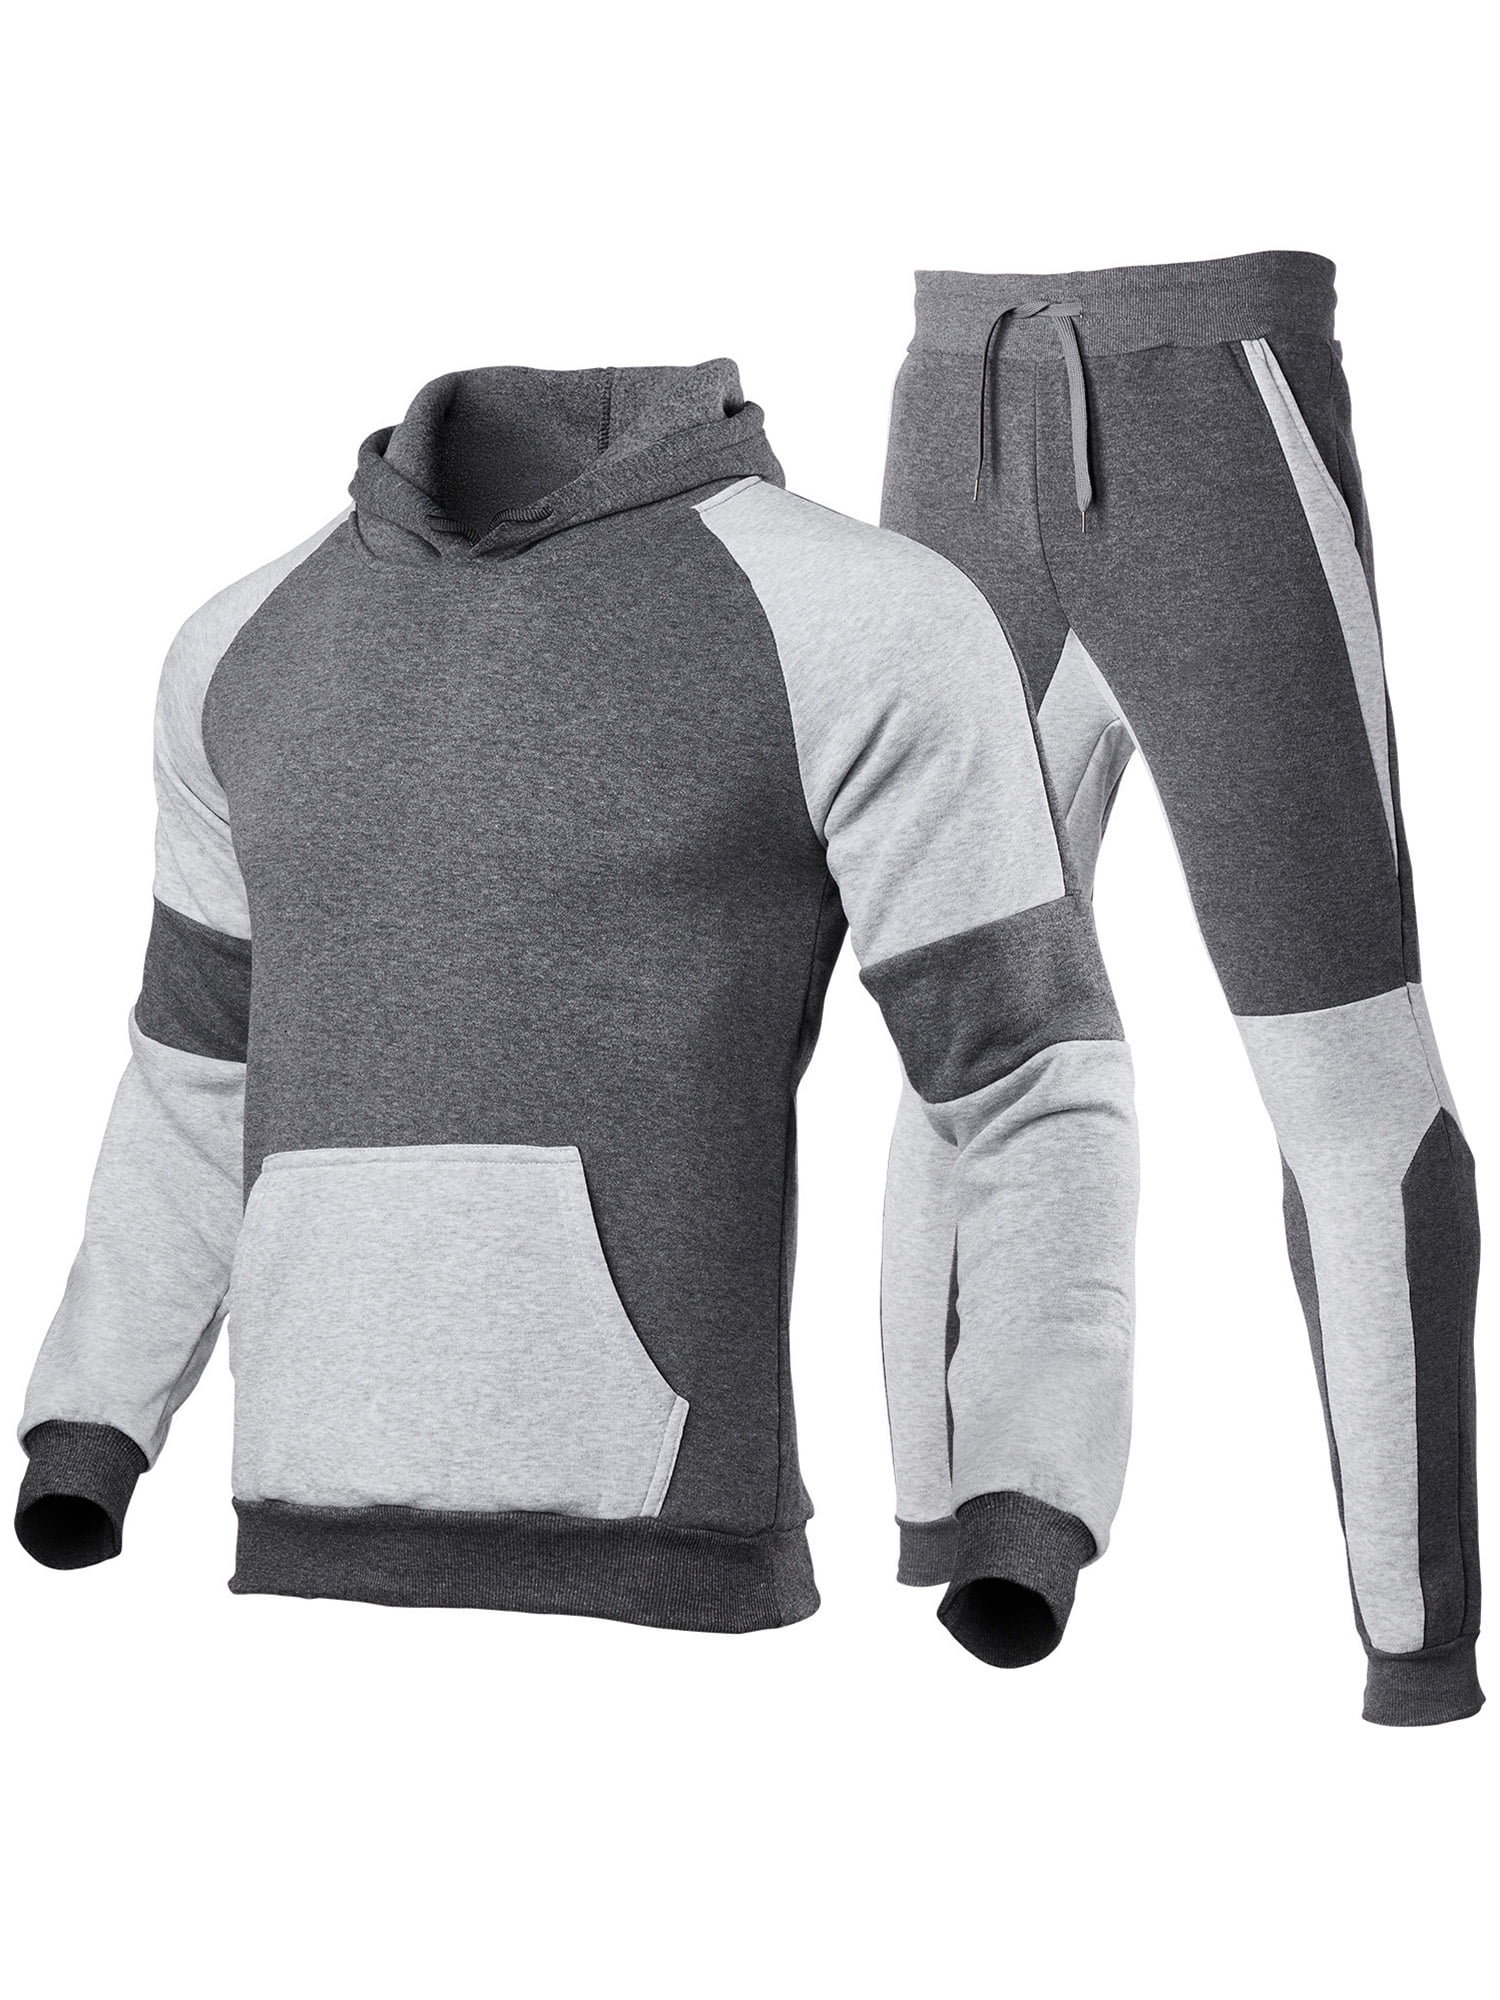 Frontwalk Mens Sweatsuits 2 Piece Hoodie Pullover Trouser Tracksuit Sets  Casual Comfy Jogging Activewear Suits with Pockets 